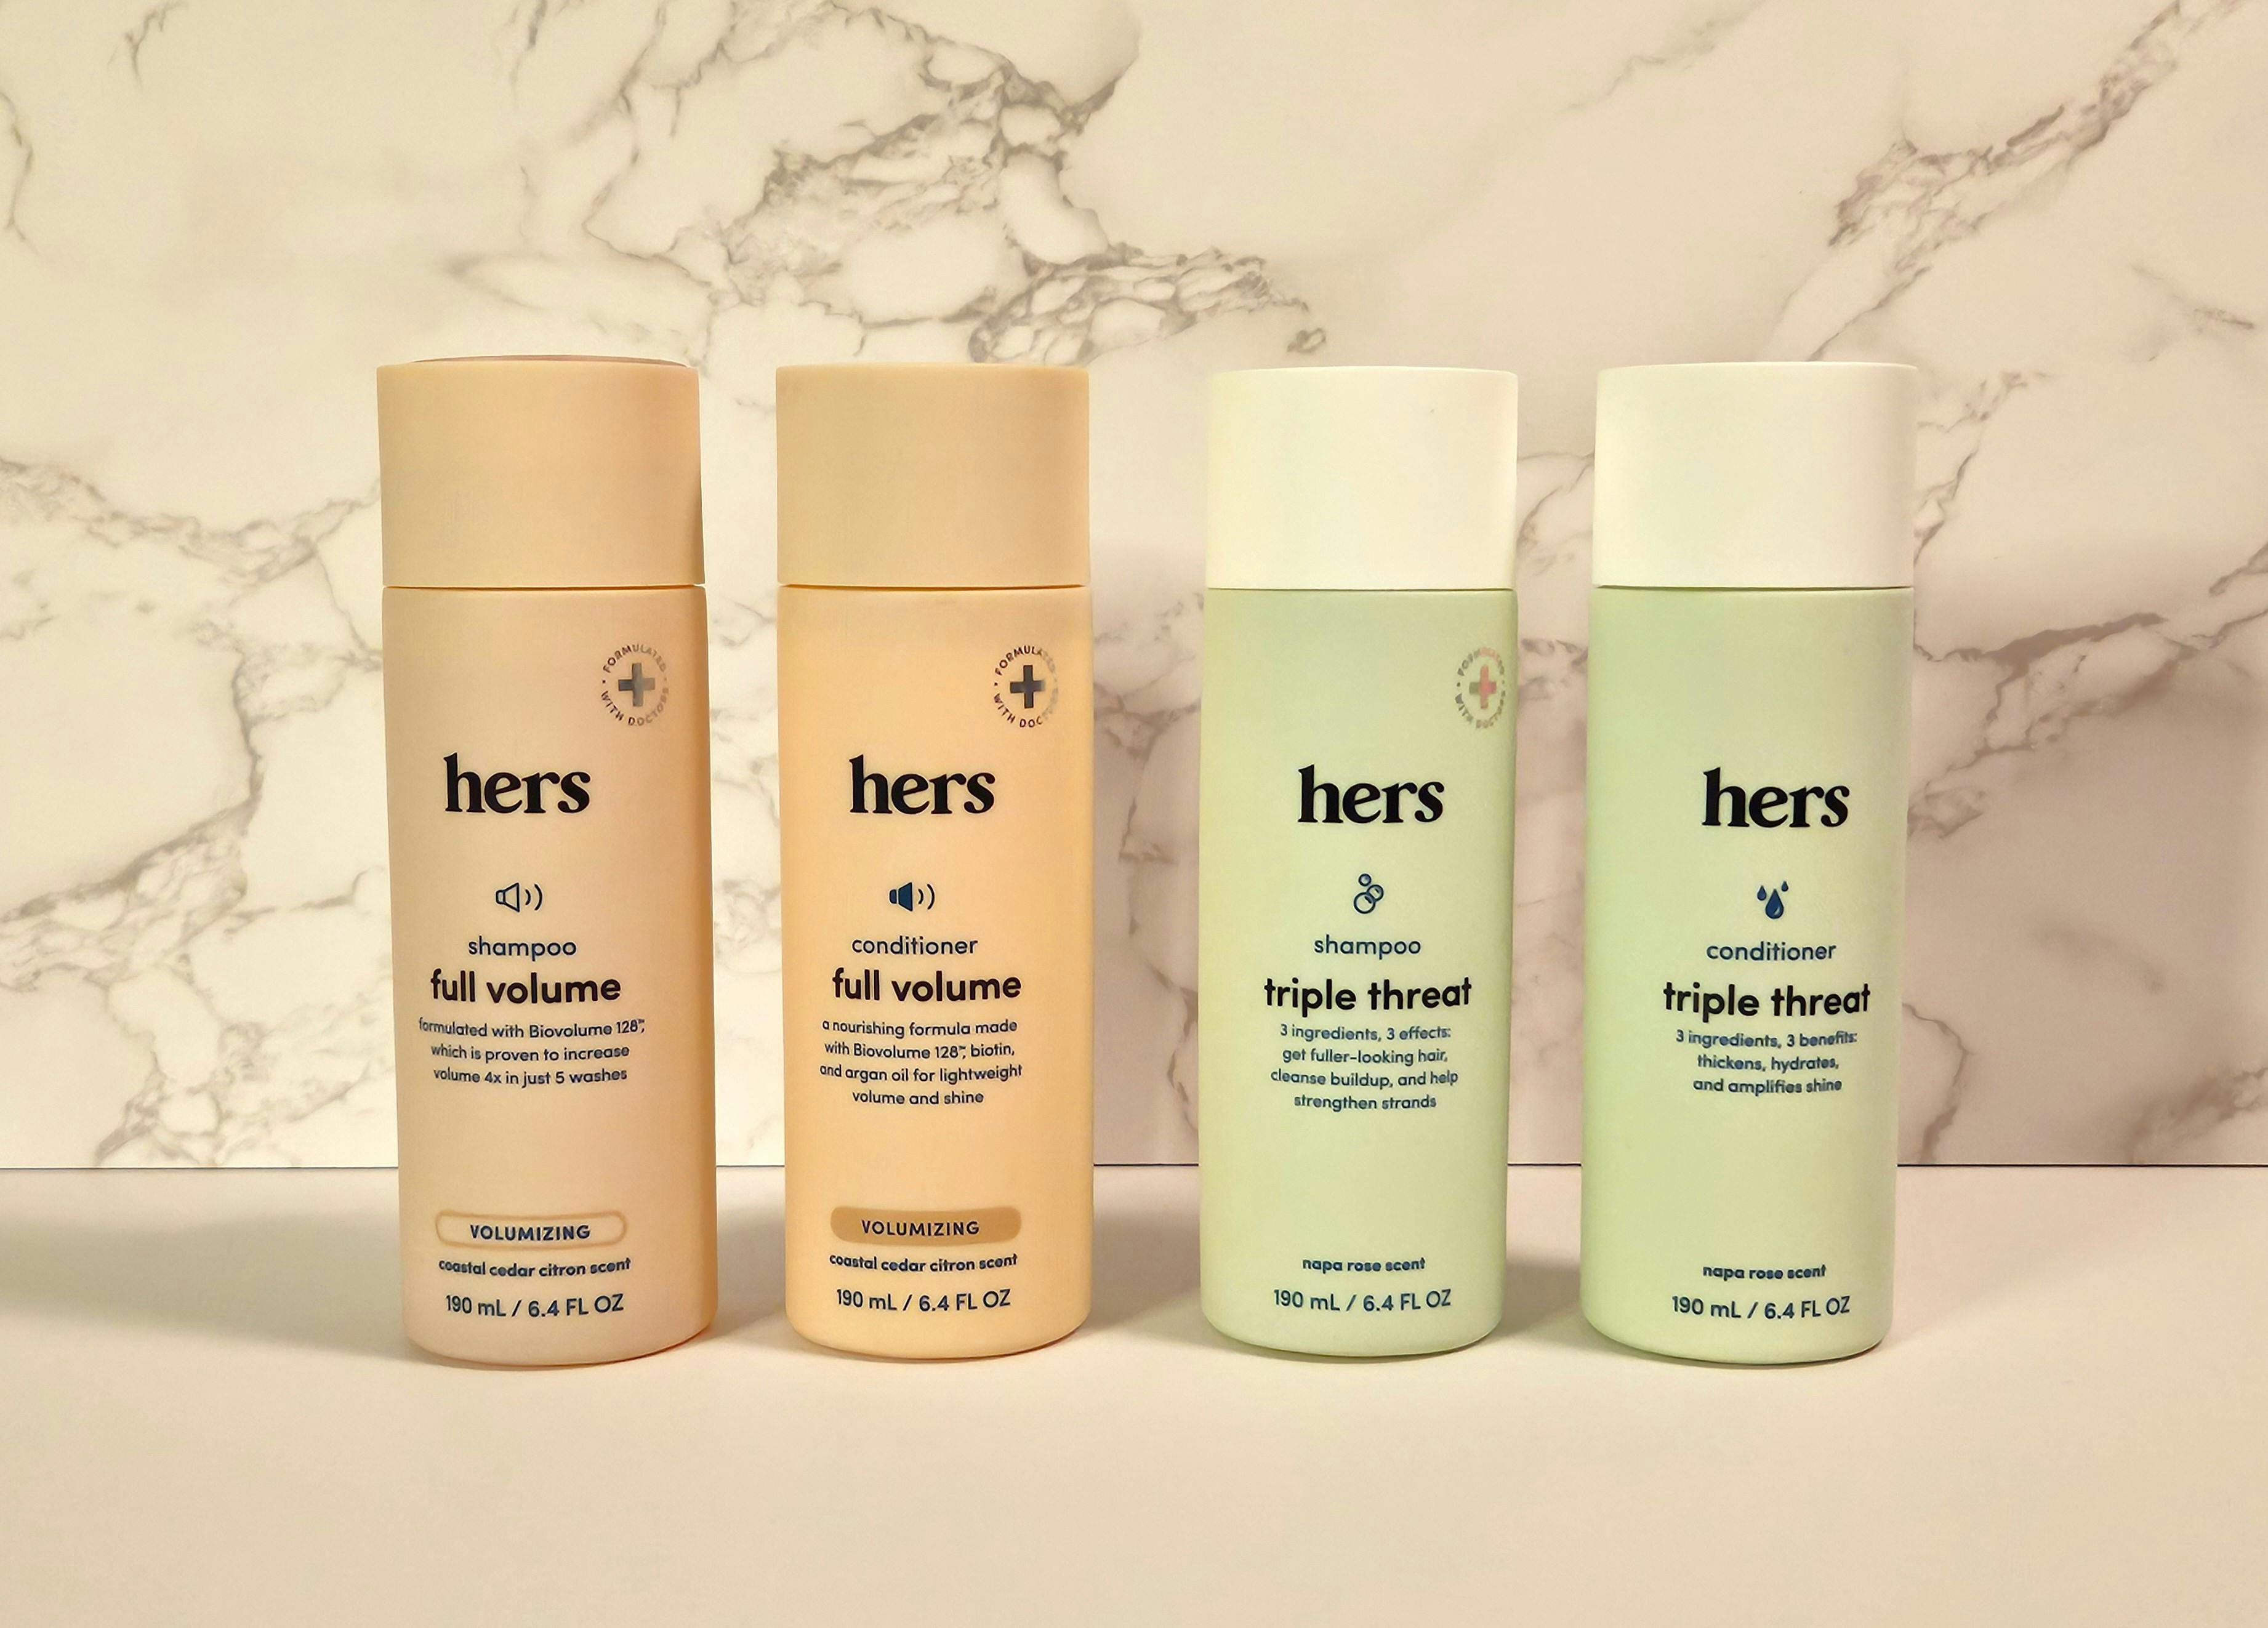 https://innerbody.imgix.net/hers-review-shampoo-and-conditioner.jpg